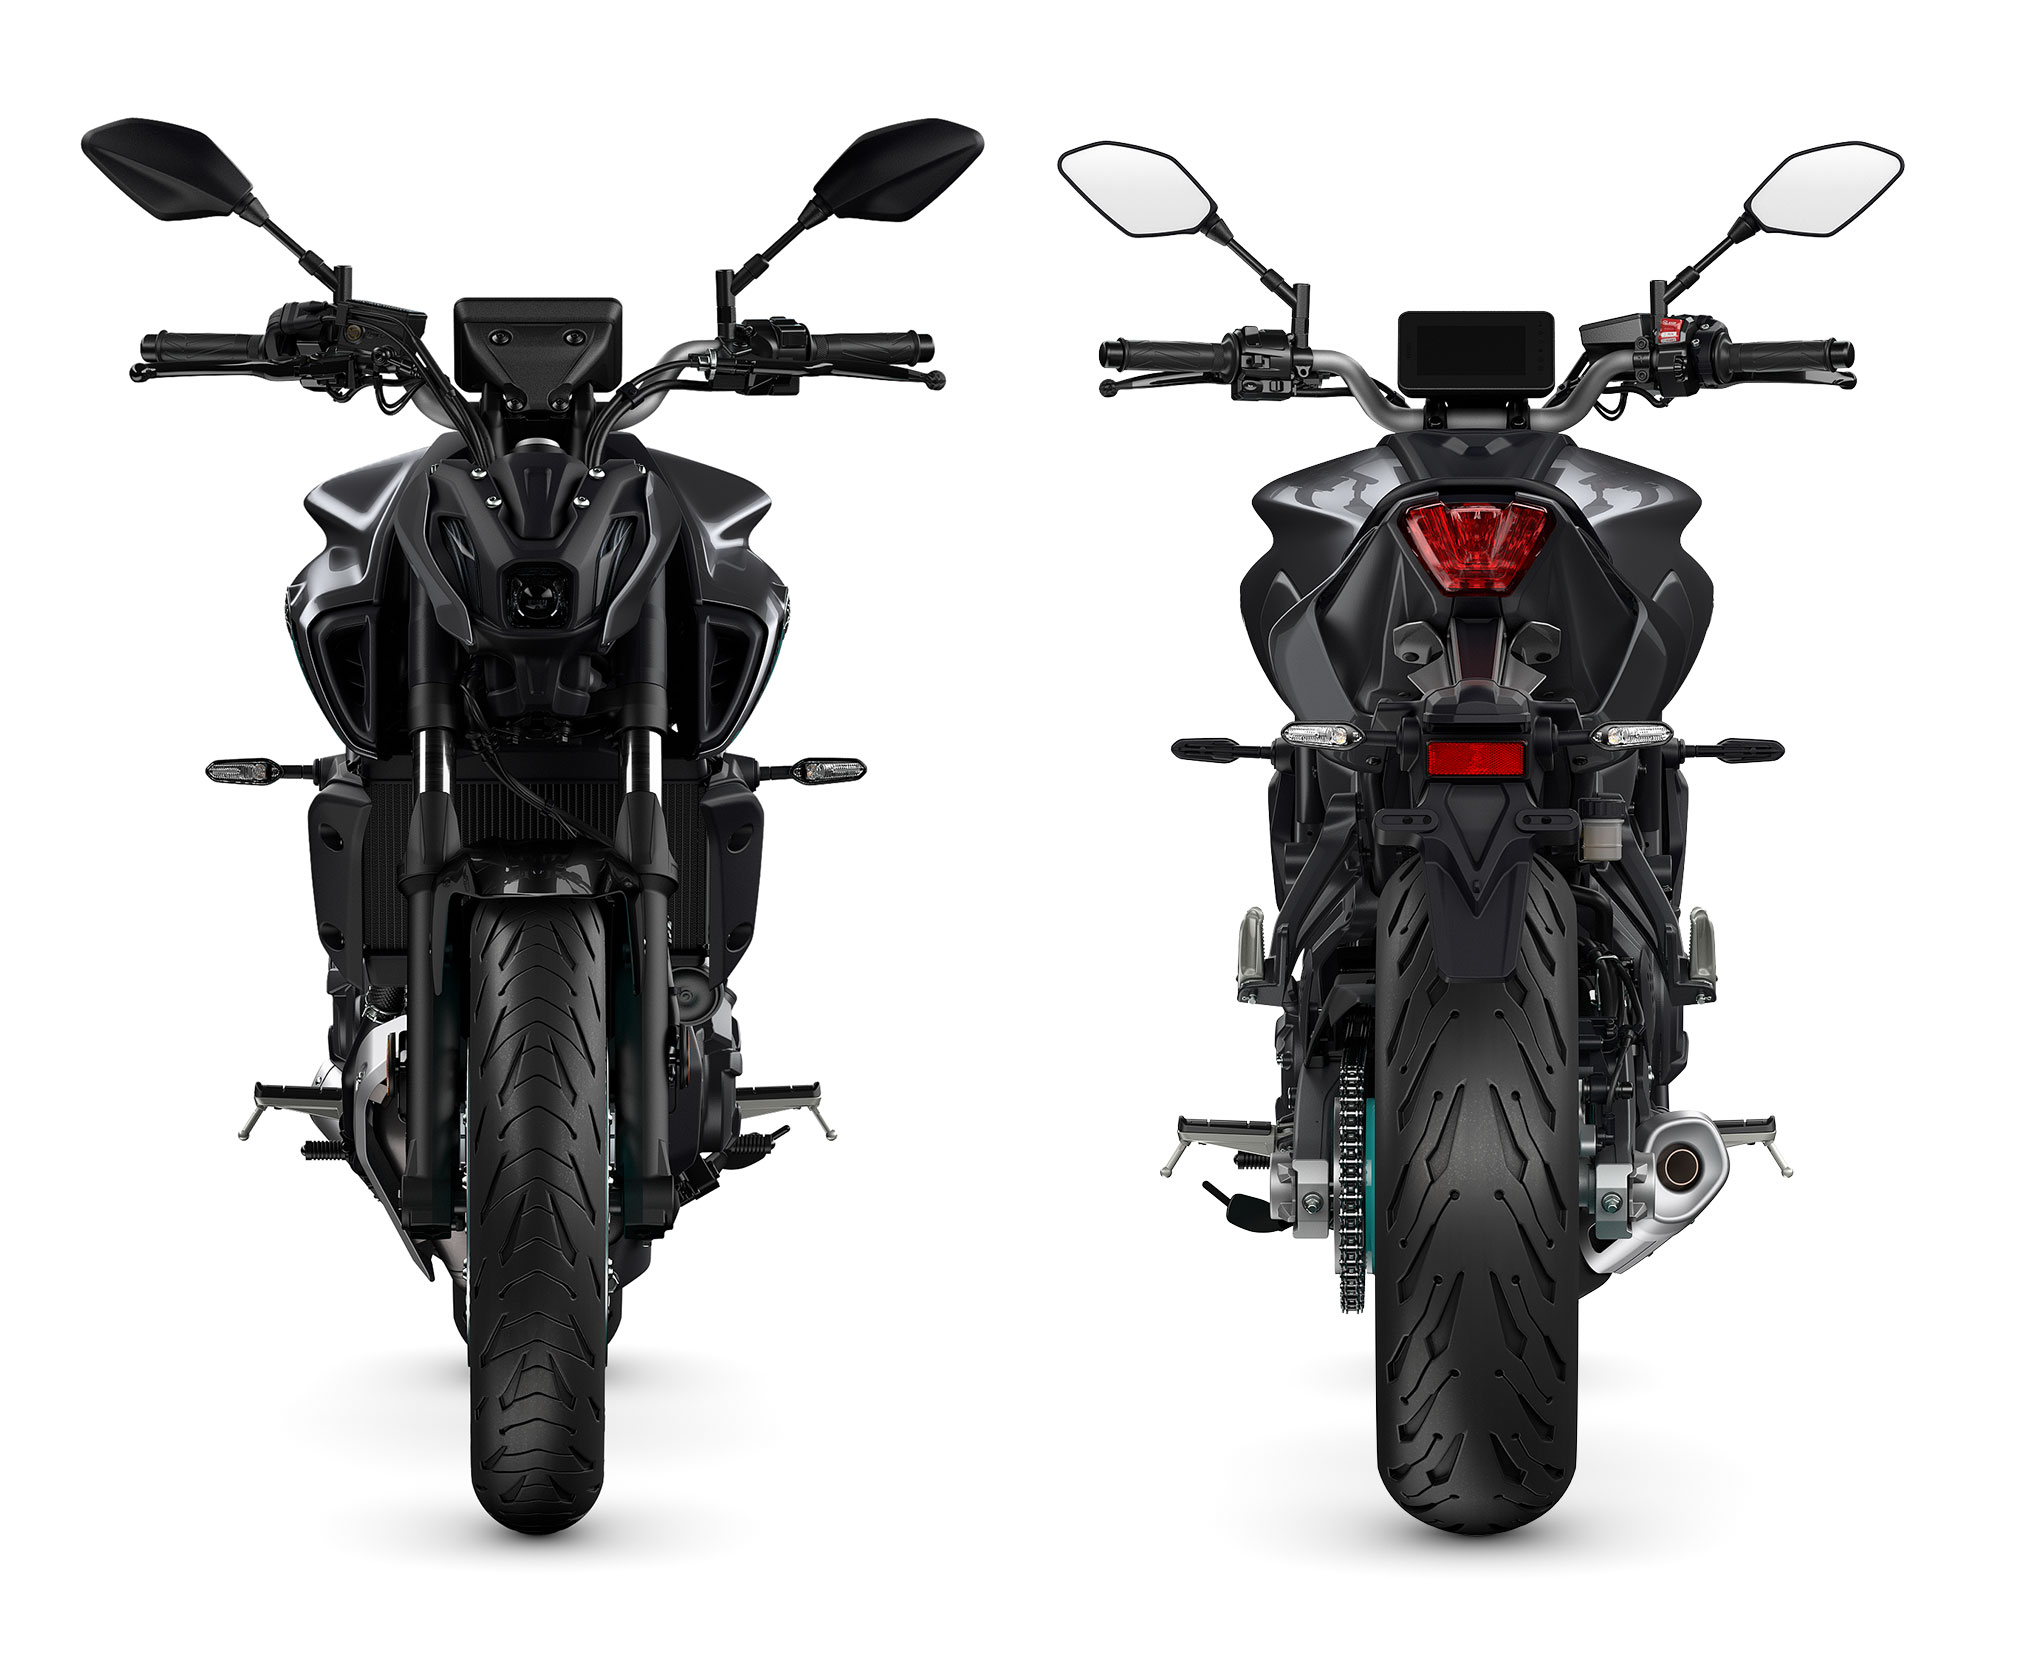 10 Things You Should Know About The Yamaha MT-07